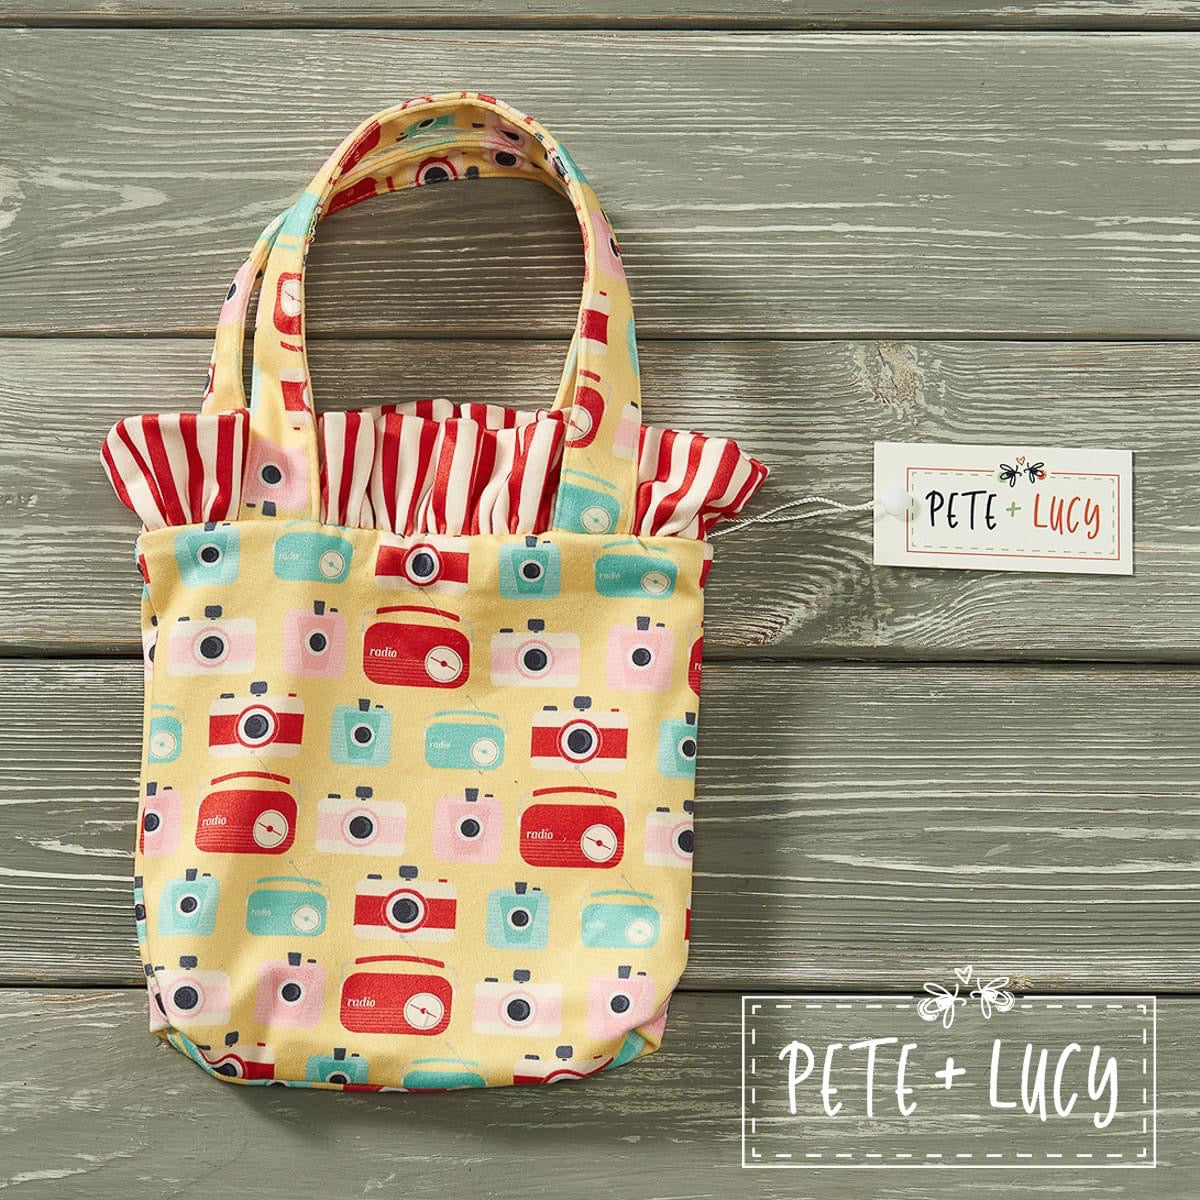 Retro Summer Bucket Purse by Pete and Lucy